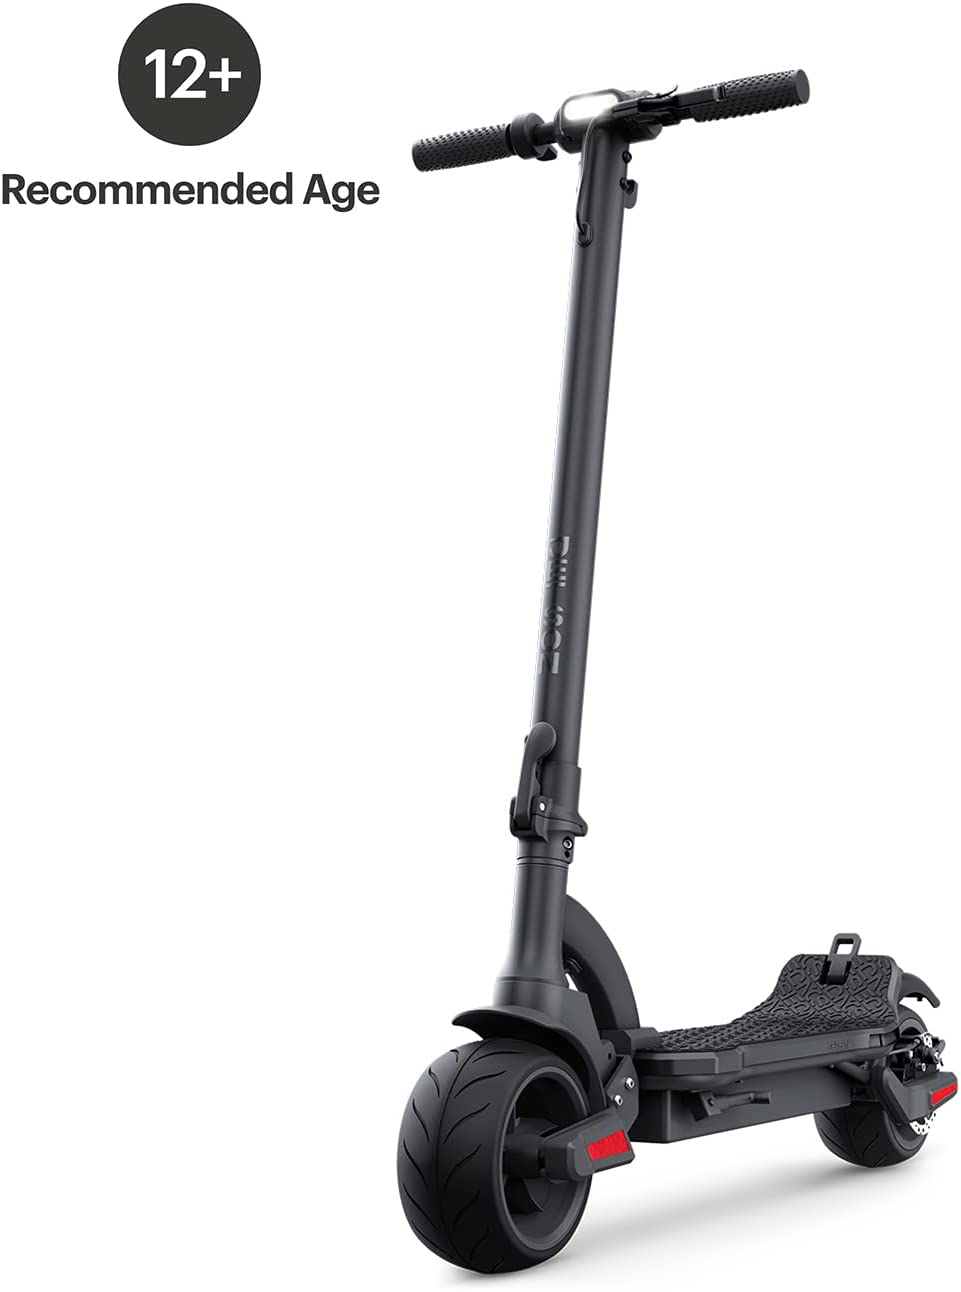 Jetson, Jetson Canyon Up To 22 Mile Range 15.5 MPH 8.5" Tires 500W Foldable Electric Scooter New